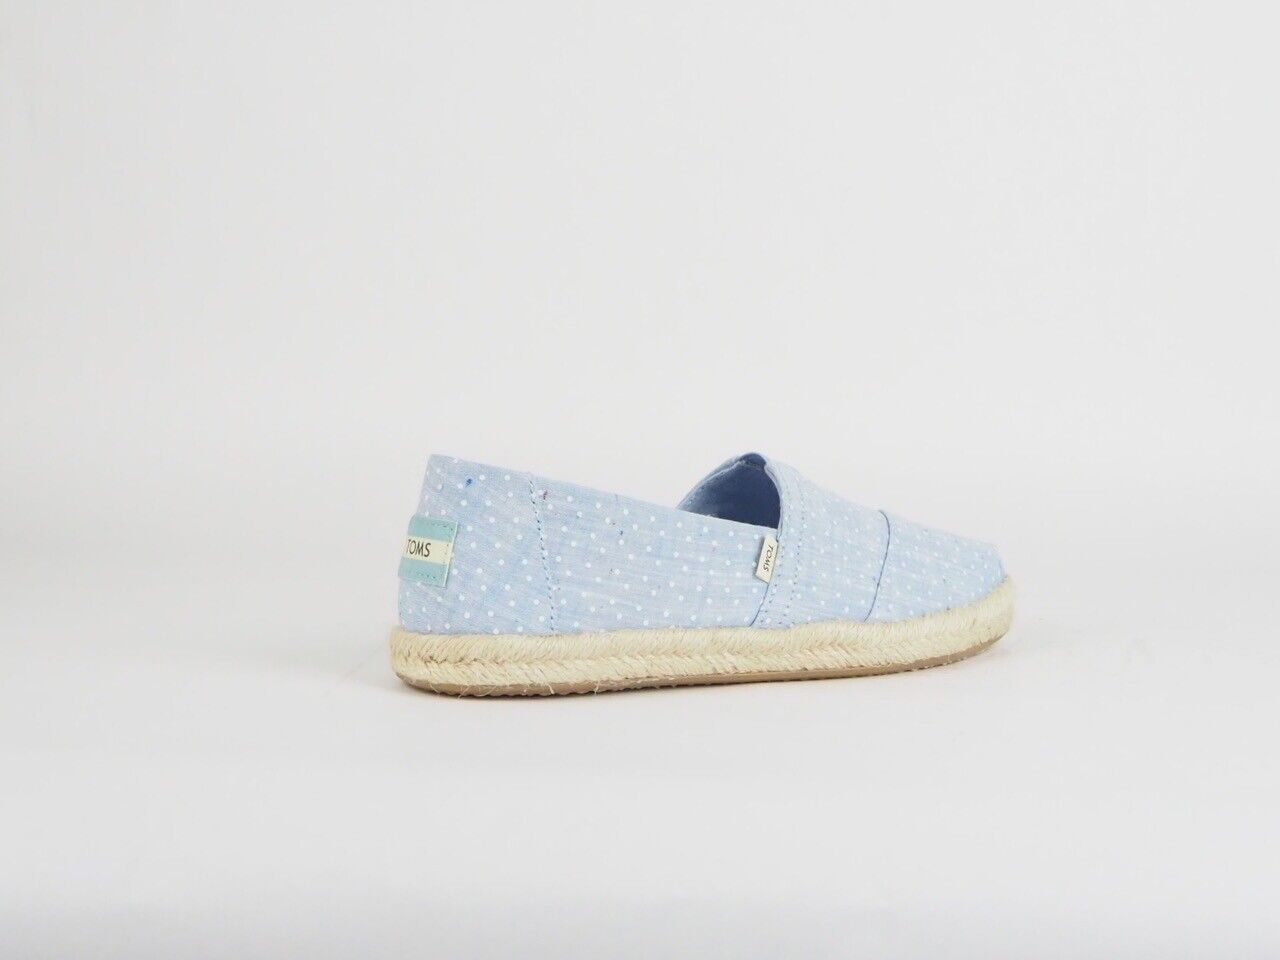 Womens Toms Classic Blue White Dot Flats Slip On Casual Summer Ladies Trainers - London Top Style